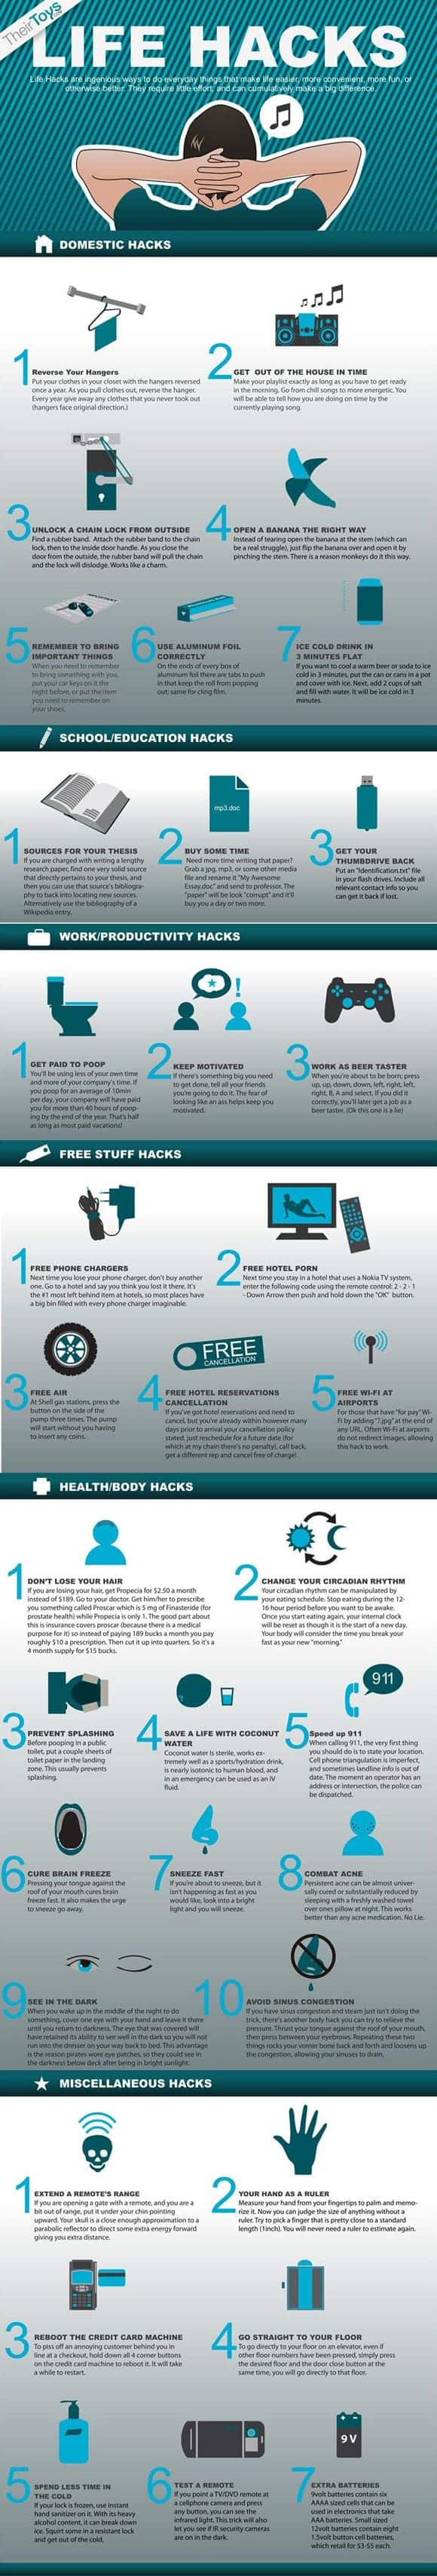 Life Hacks | Daily Infographic